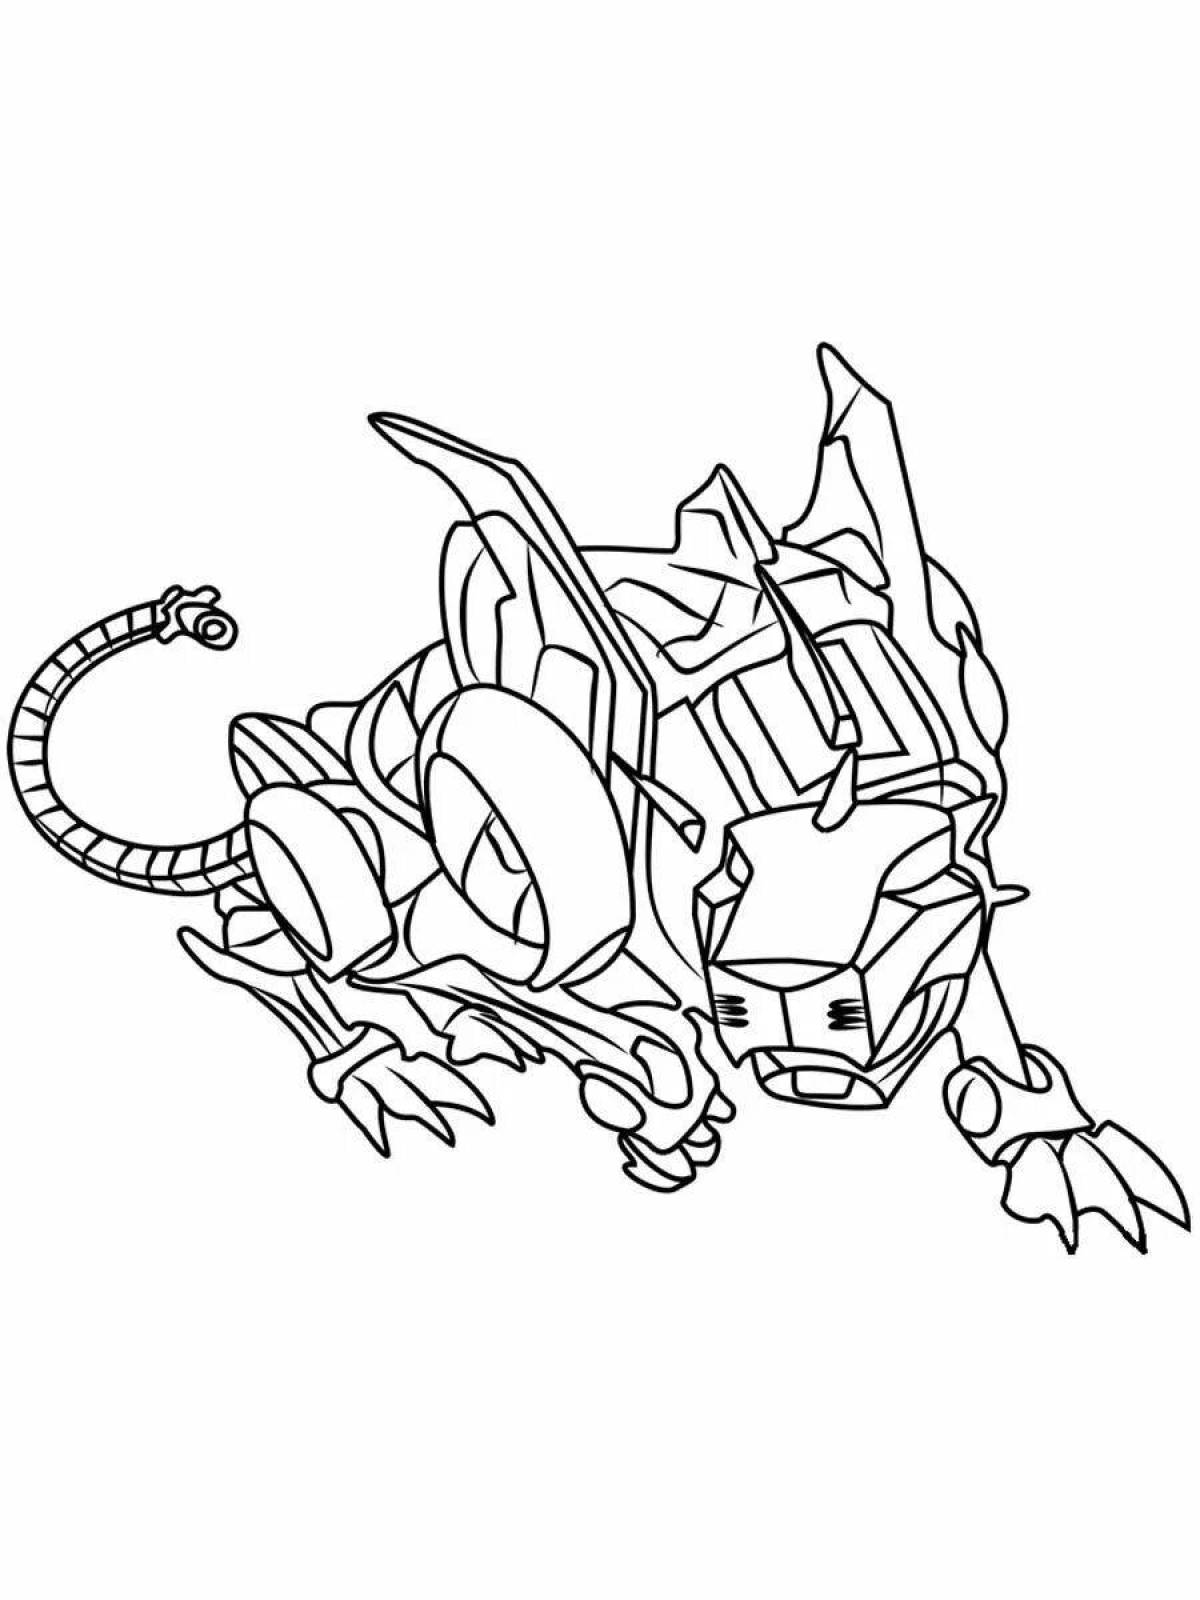 Playful screamer coloring pages for boys